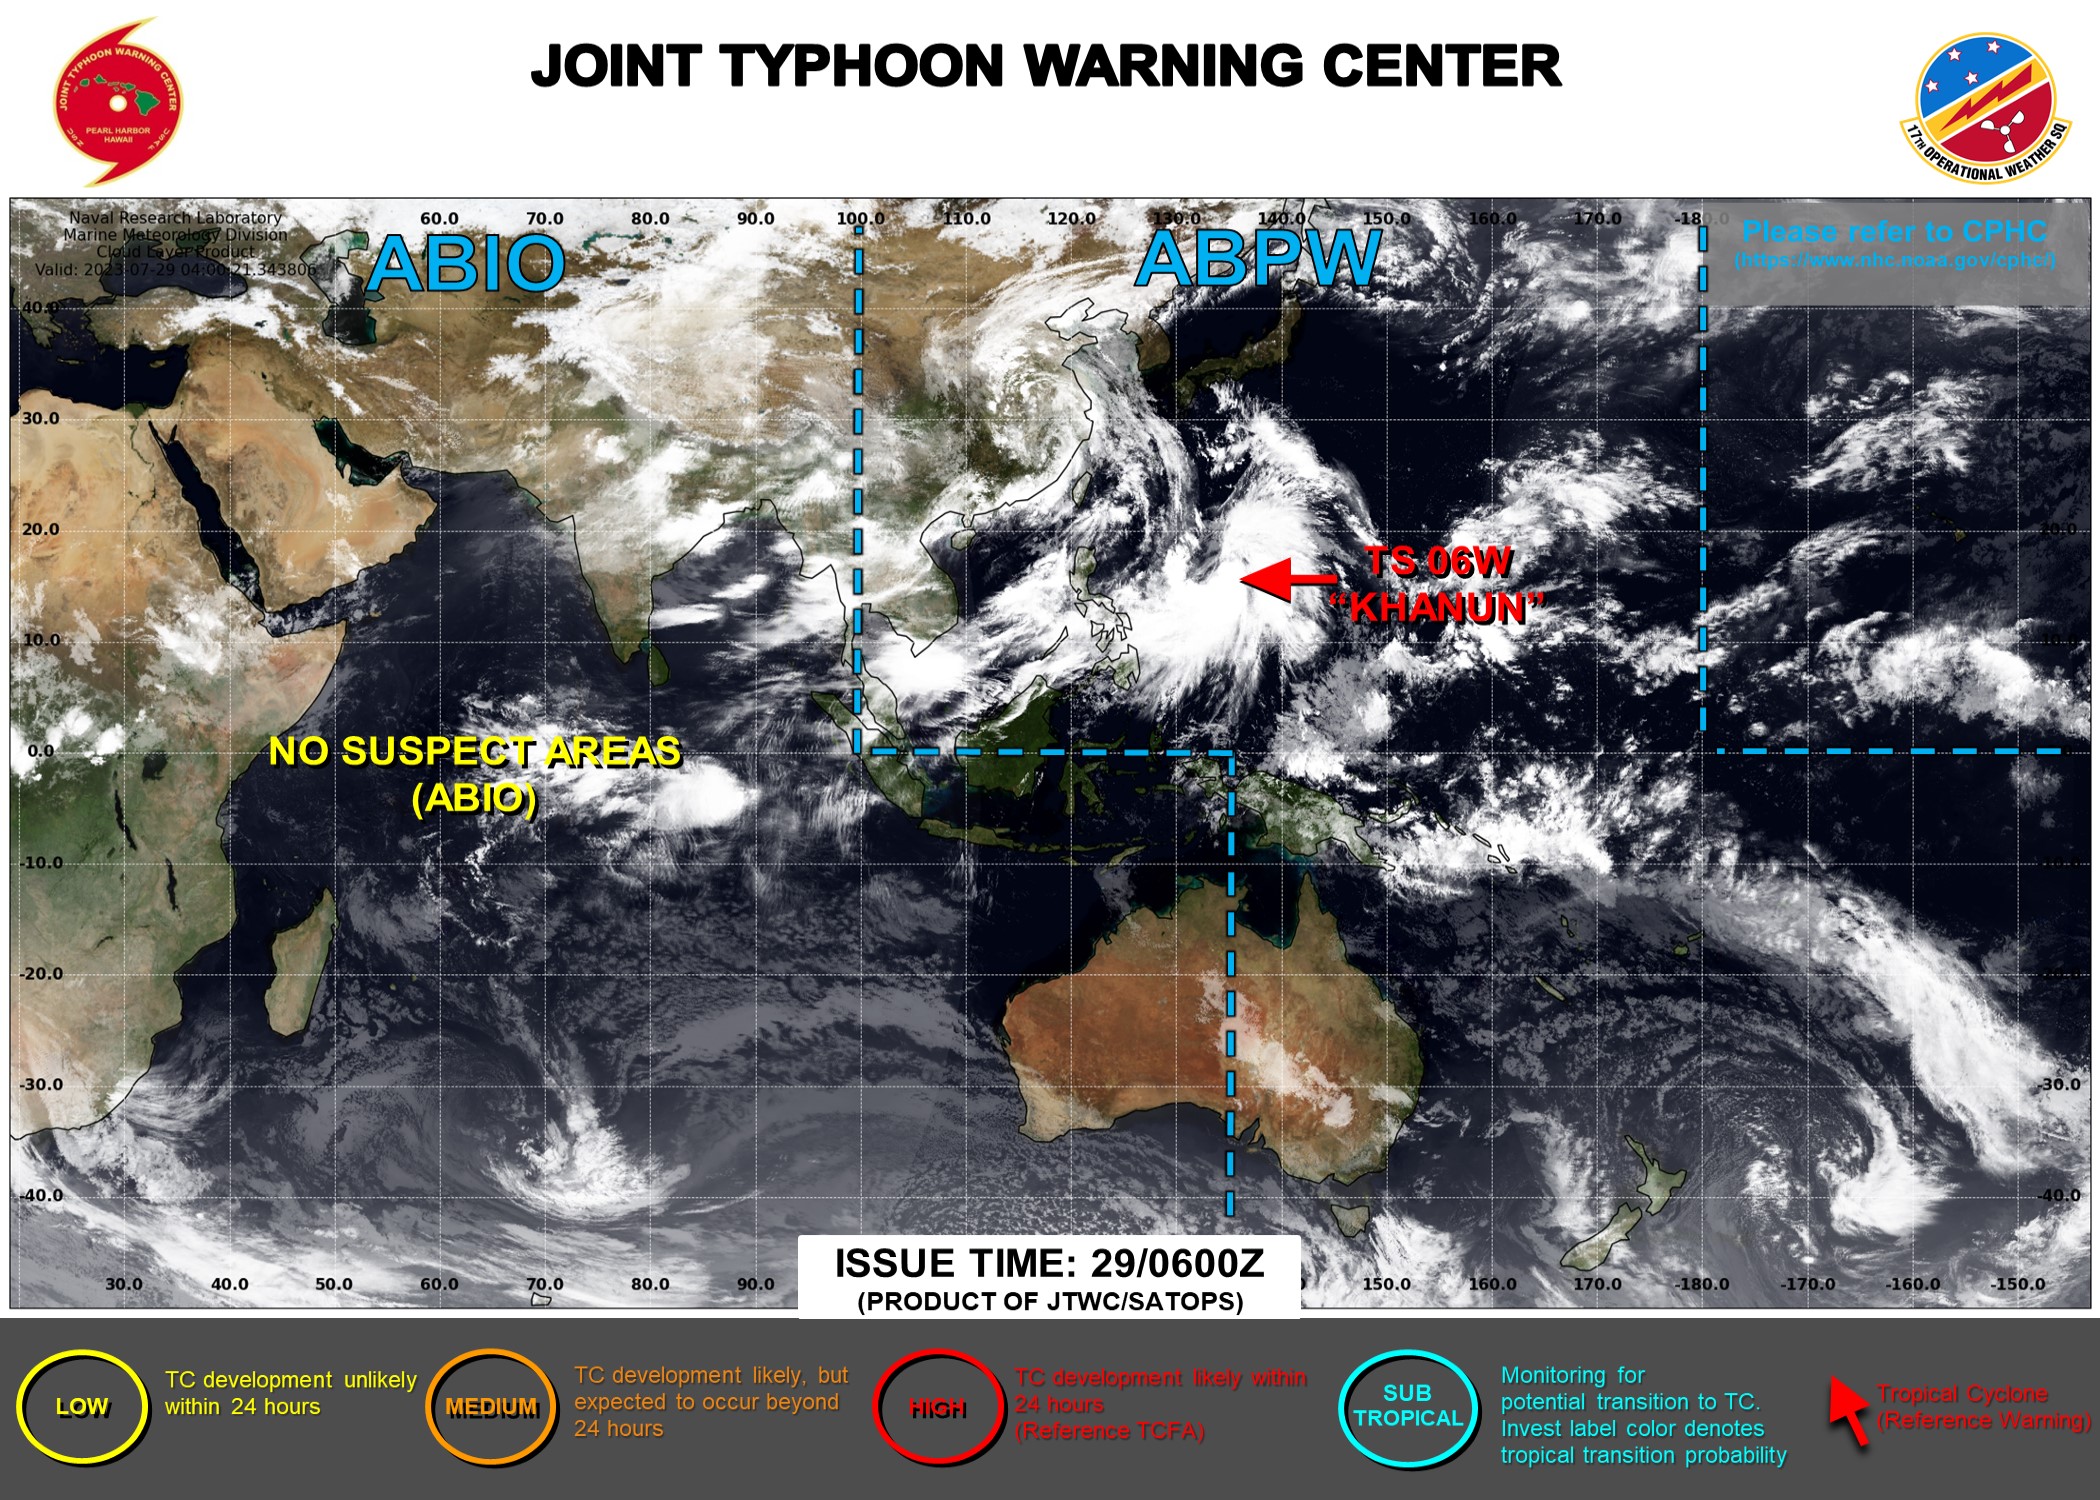 JTWC IS ISSUING 6HOURLY WARNINGS AND 3HOURLY SATELLITE BULLETINS TS 06W(KHANUN). 6HOURLY WARNINGS AND 3HOURLY SATELLITE BULLETINS ON 05W(DOKSURI) WERE ENDED AT 28/0900UTC AND 290530UTC RESPECTIVELY .